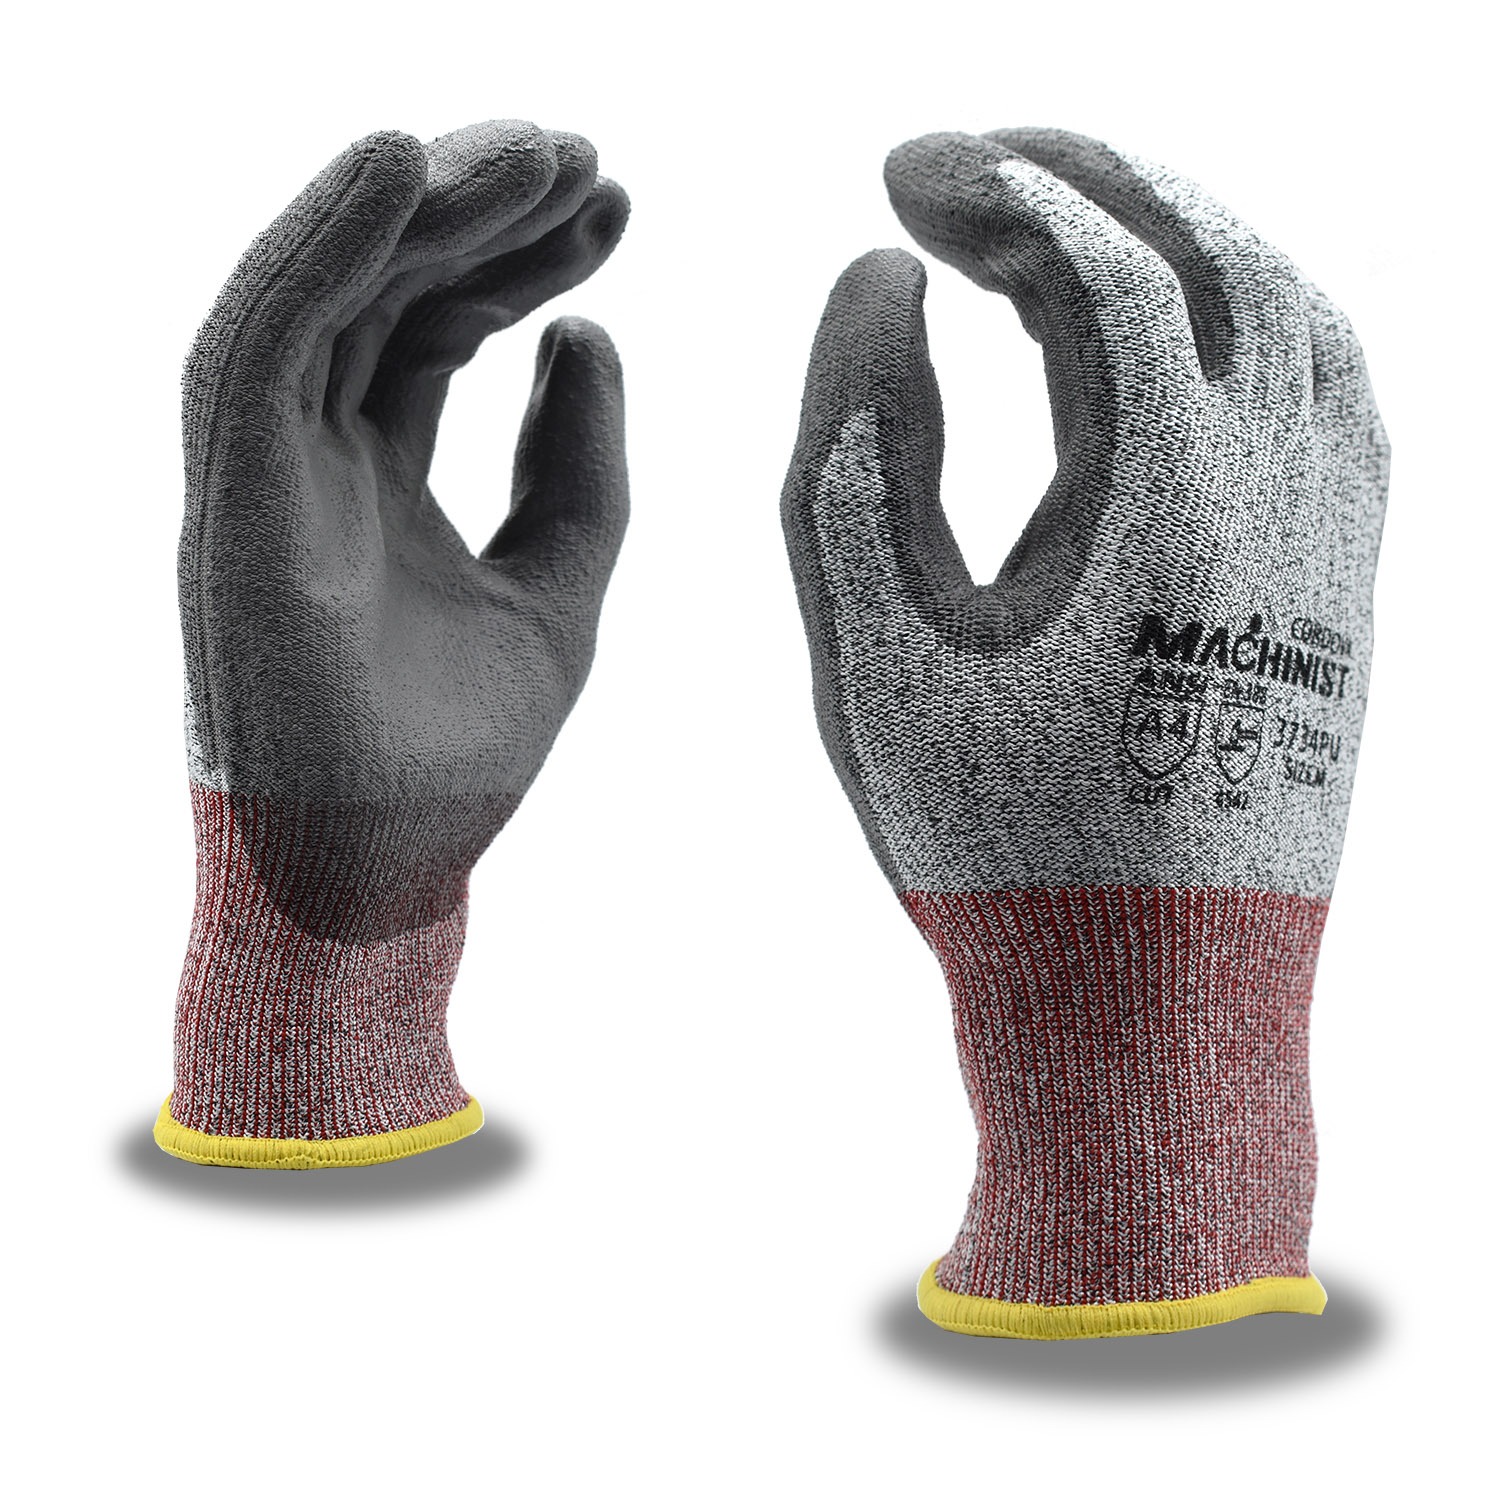 Cordova Safety Products Cut Resistant Gloves CO3734PU-M